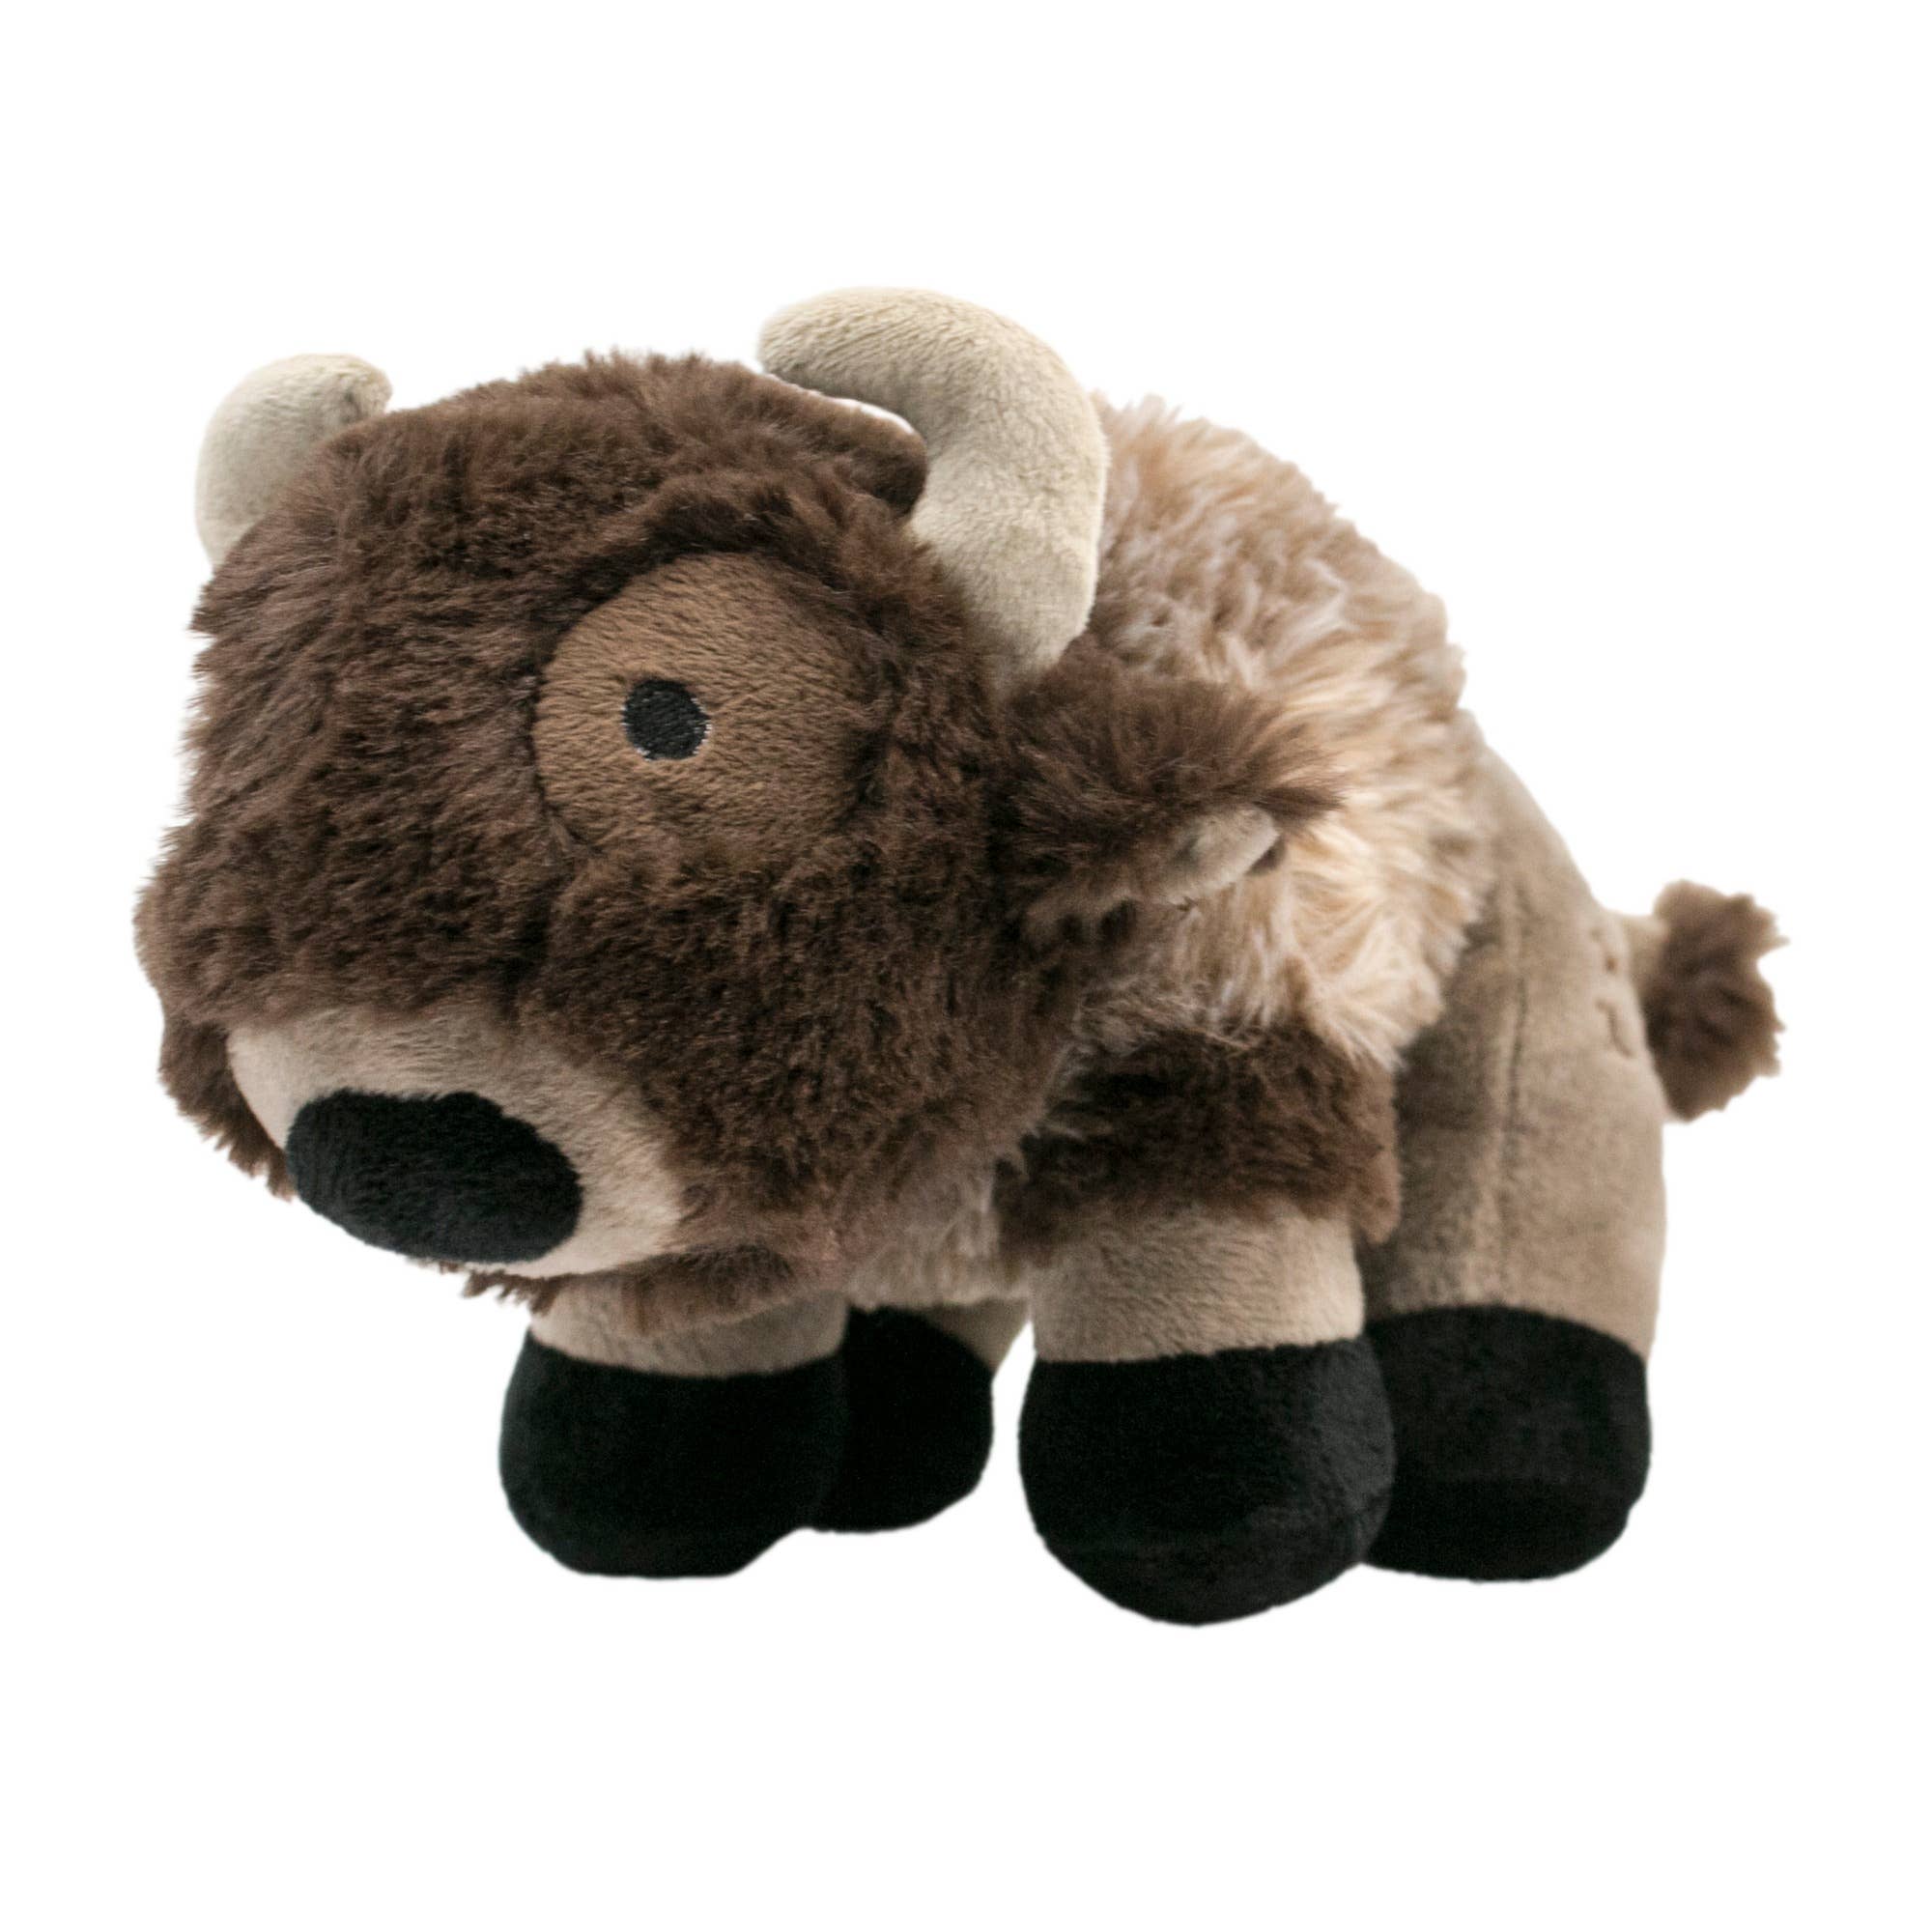 Tall Tails - 9" Plush Buffalo Squeaker Toy